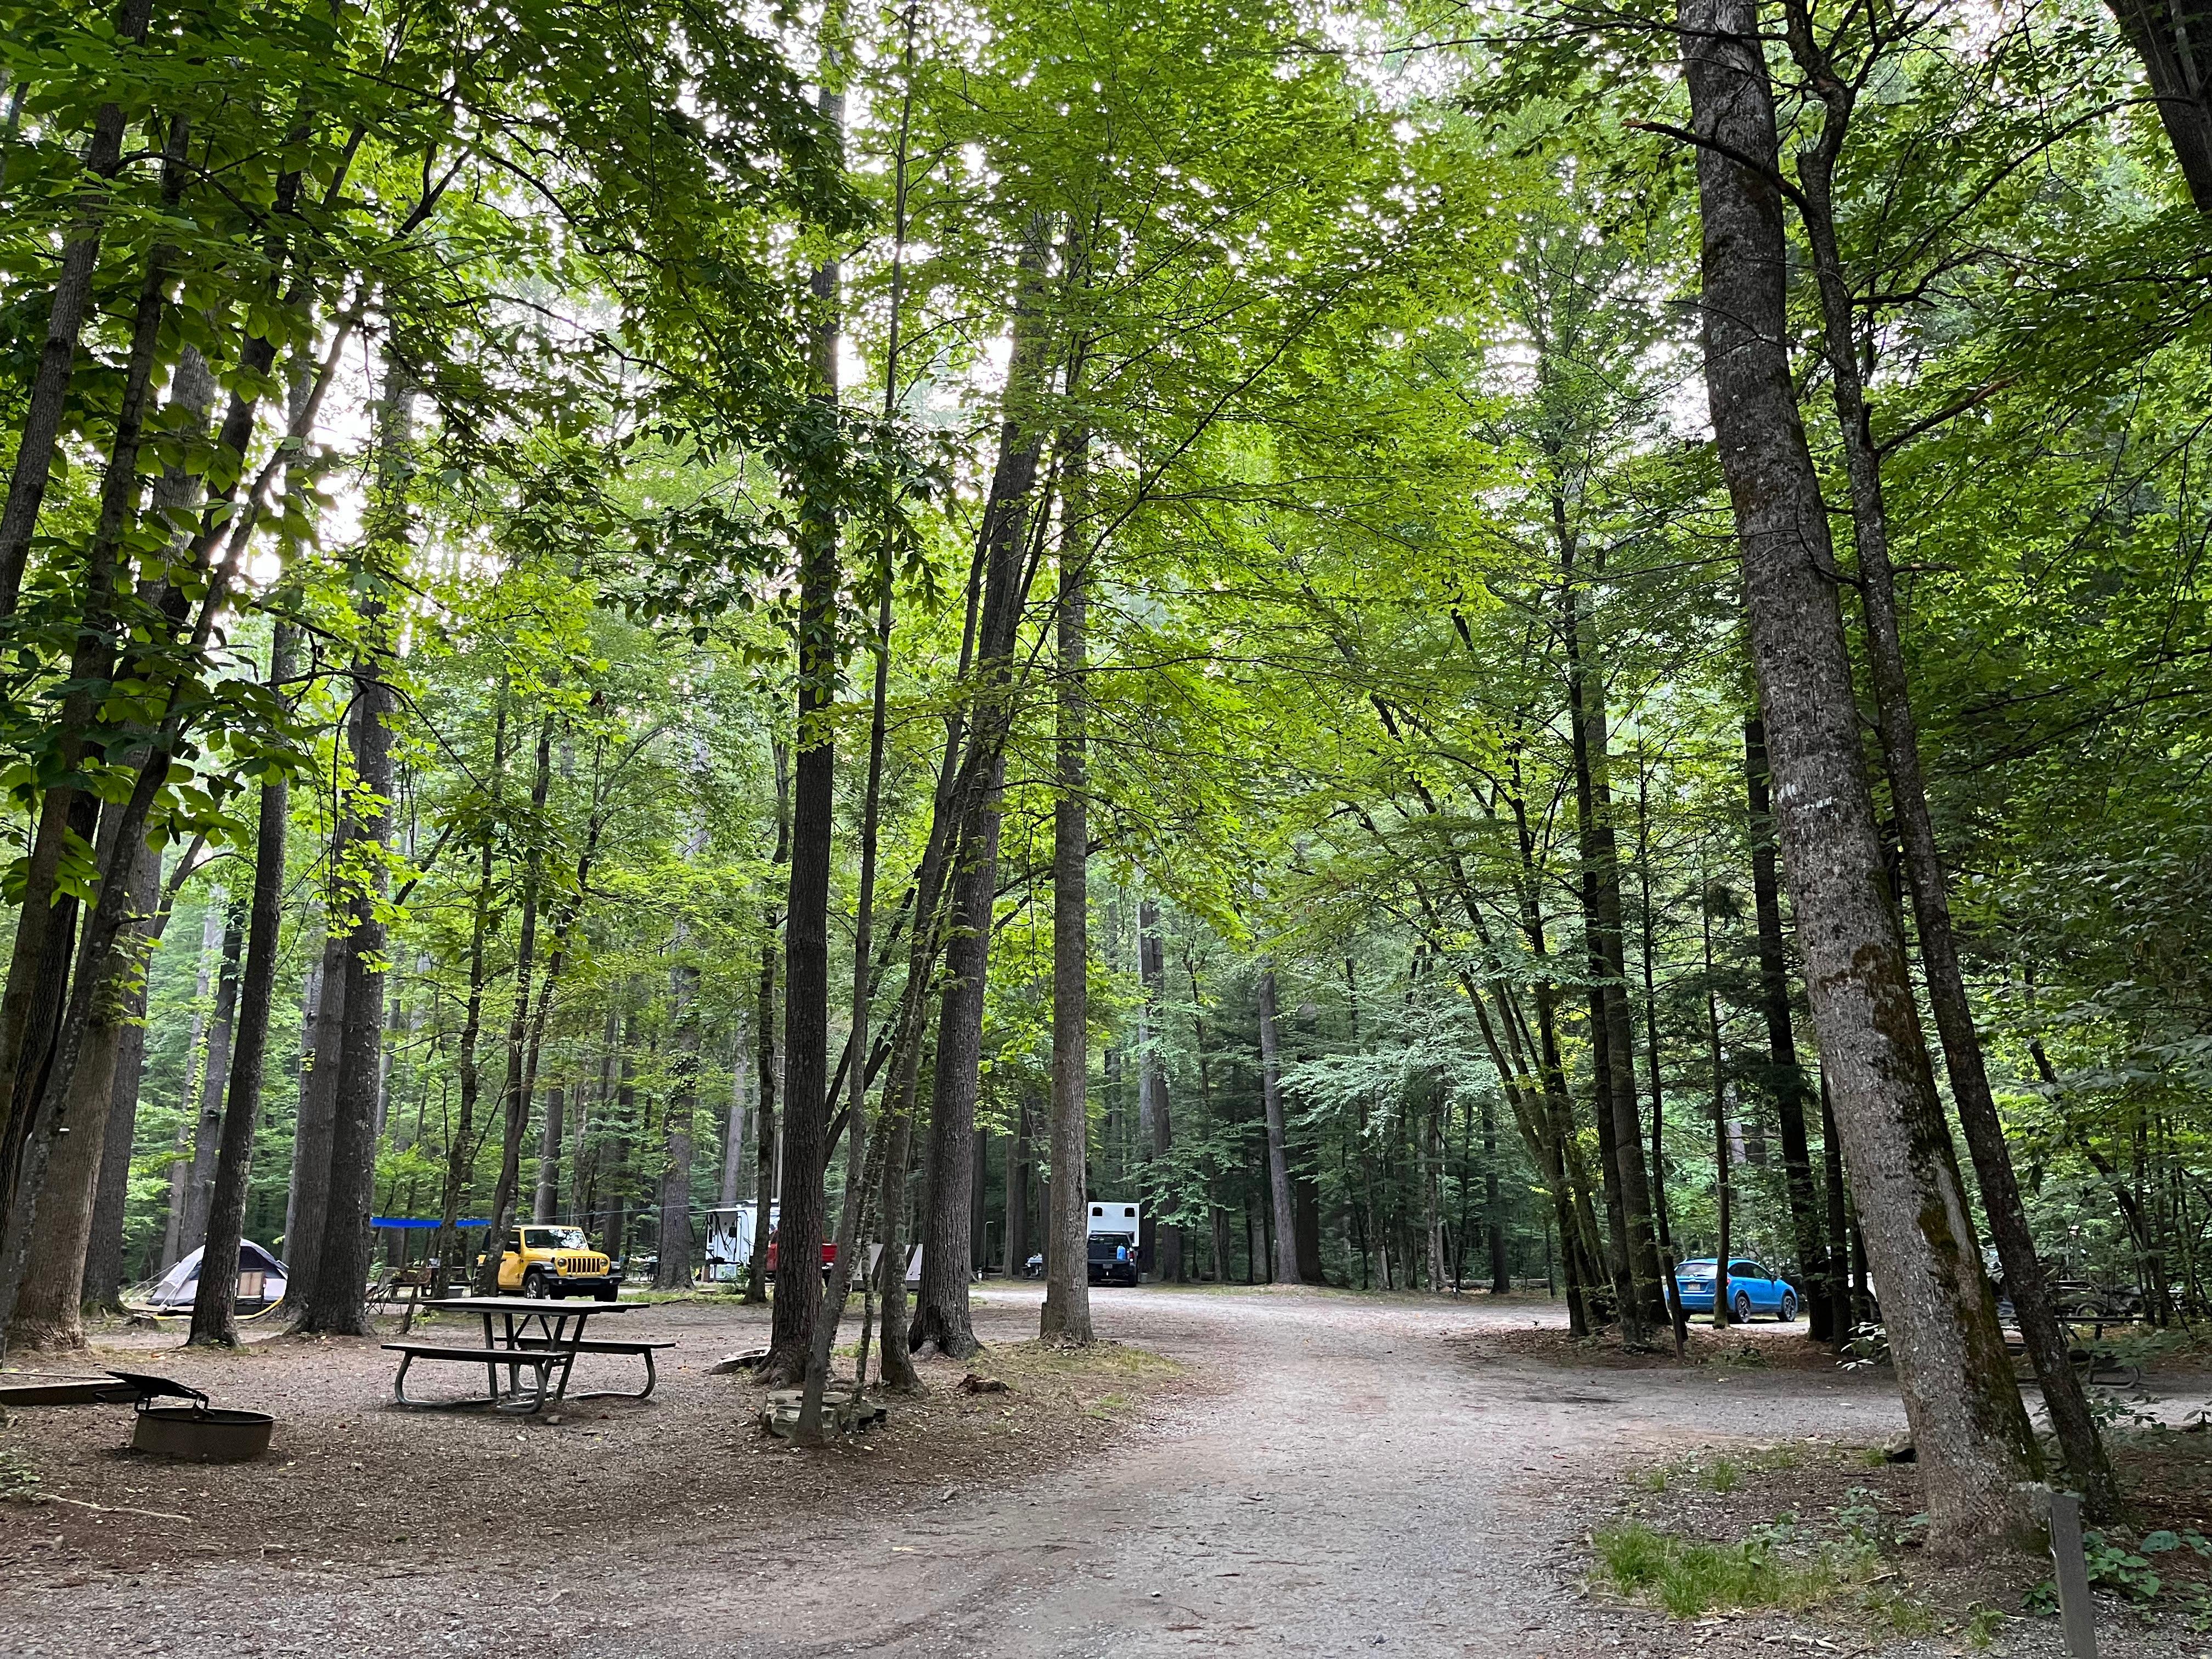 Several campsites off of a gravel road through a campground. Tents, cars, and trailers visible.